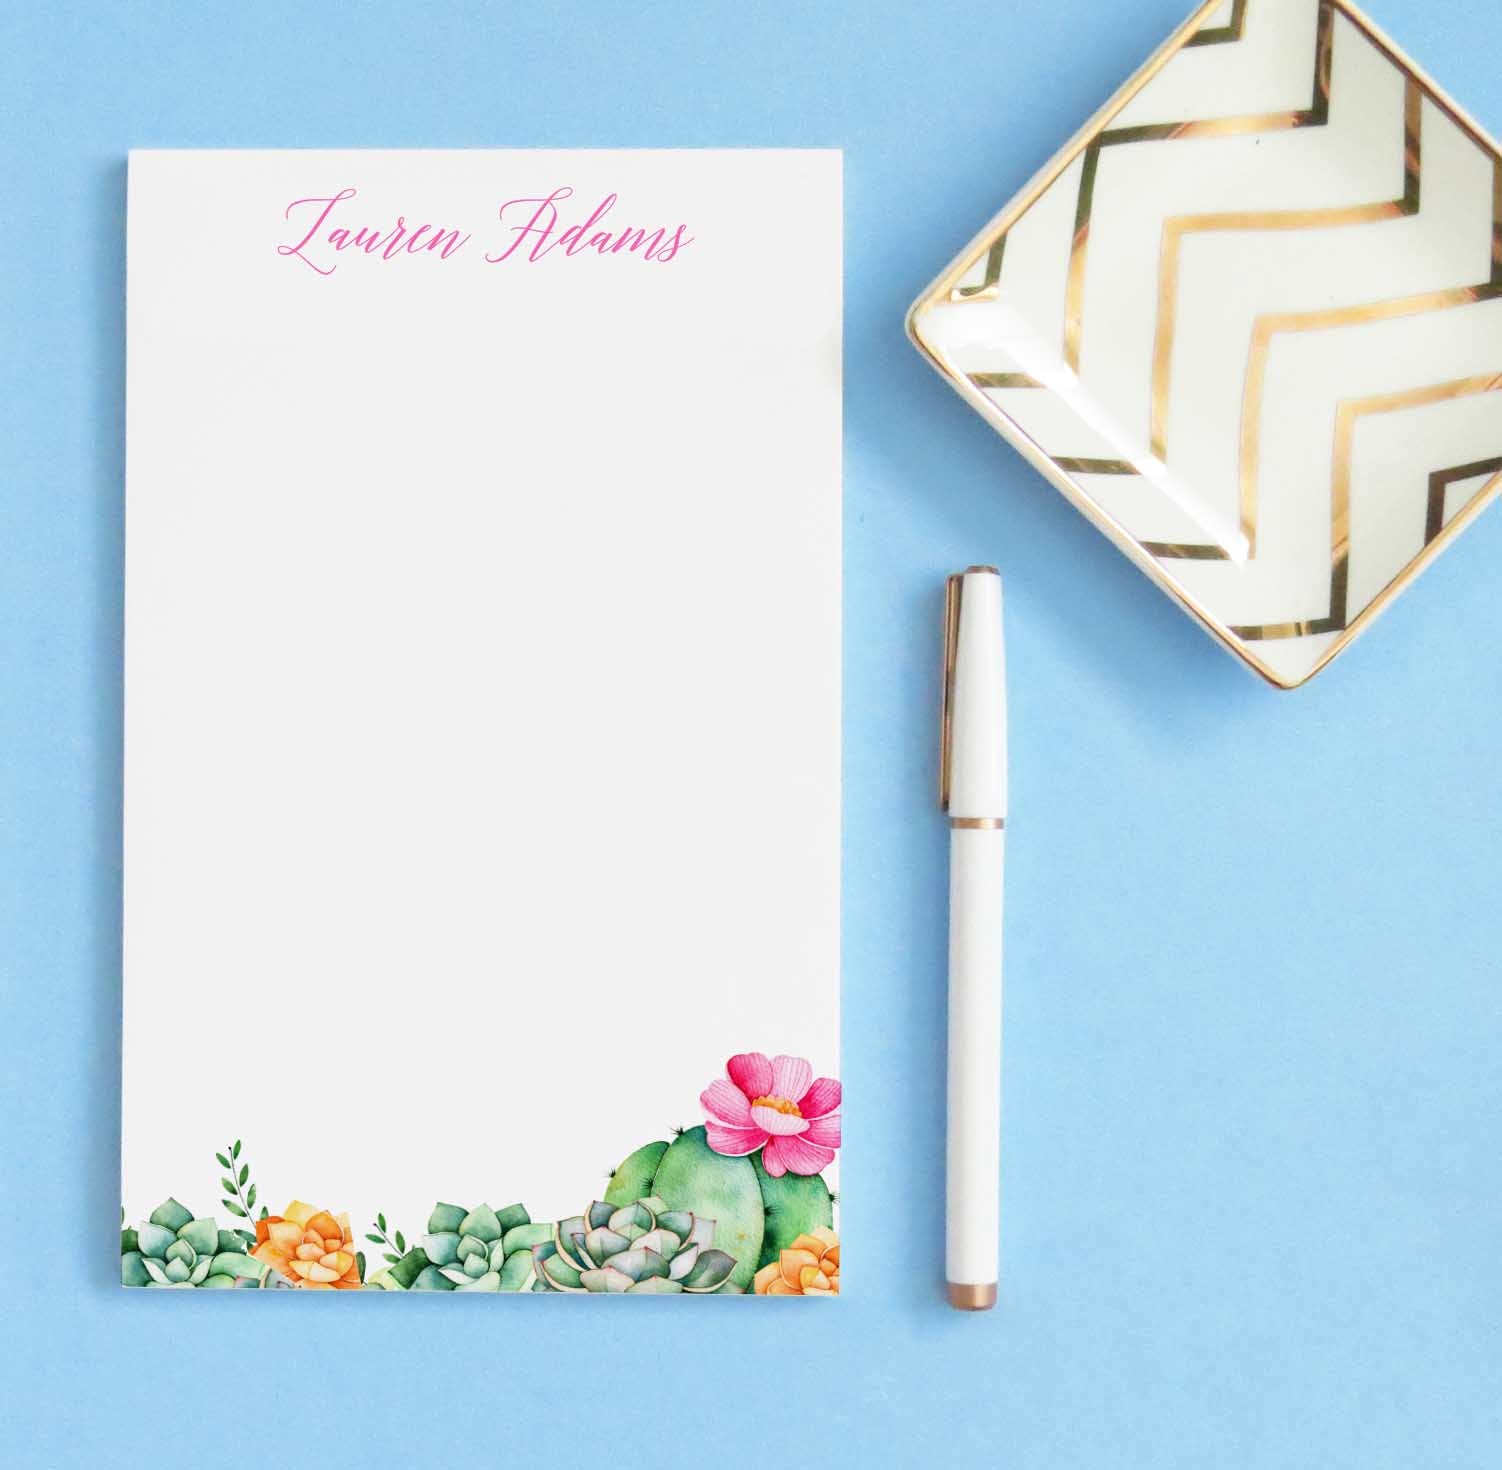 NP174 floral cactus personalized note paper succulents succulent stationery